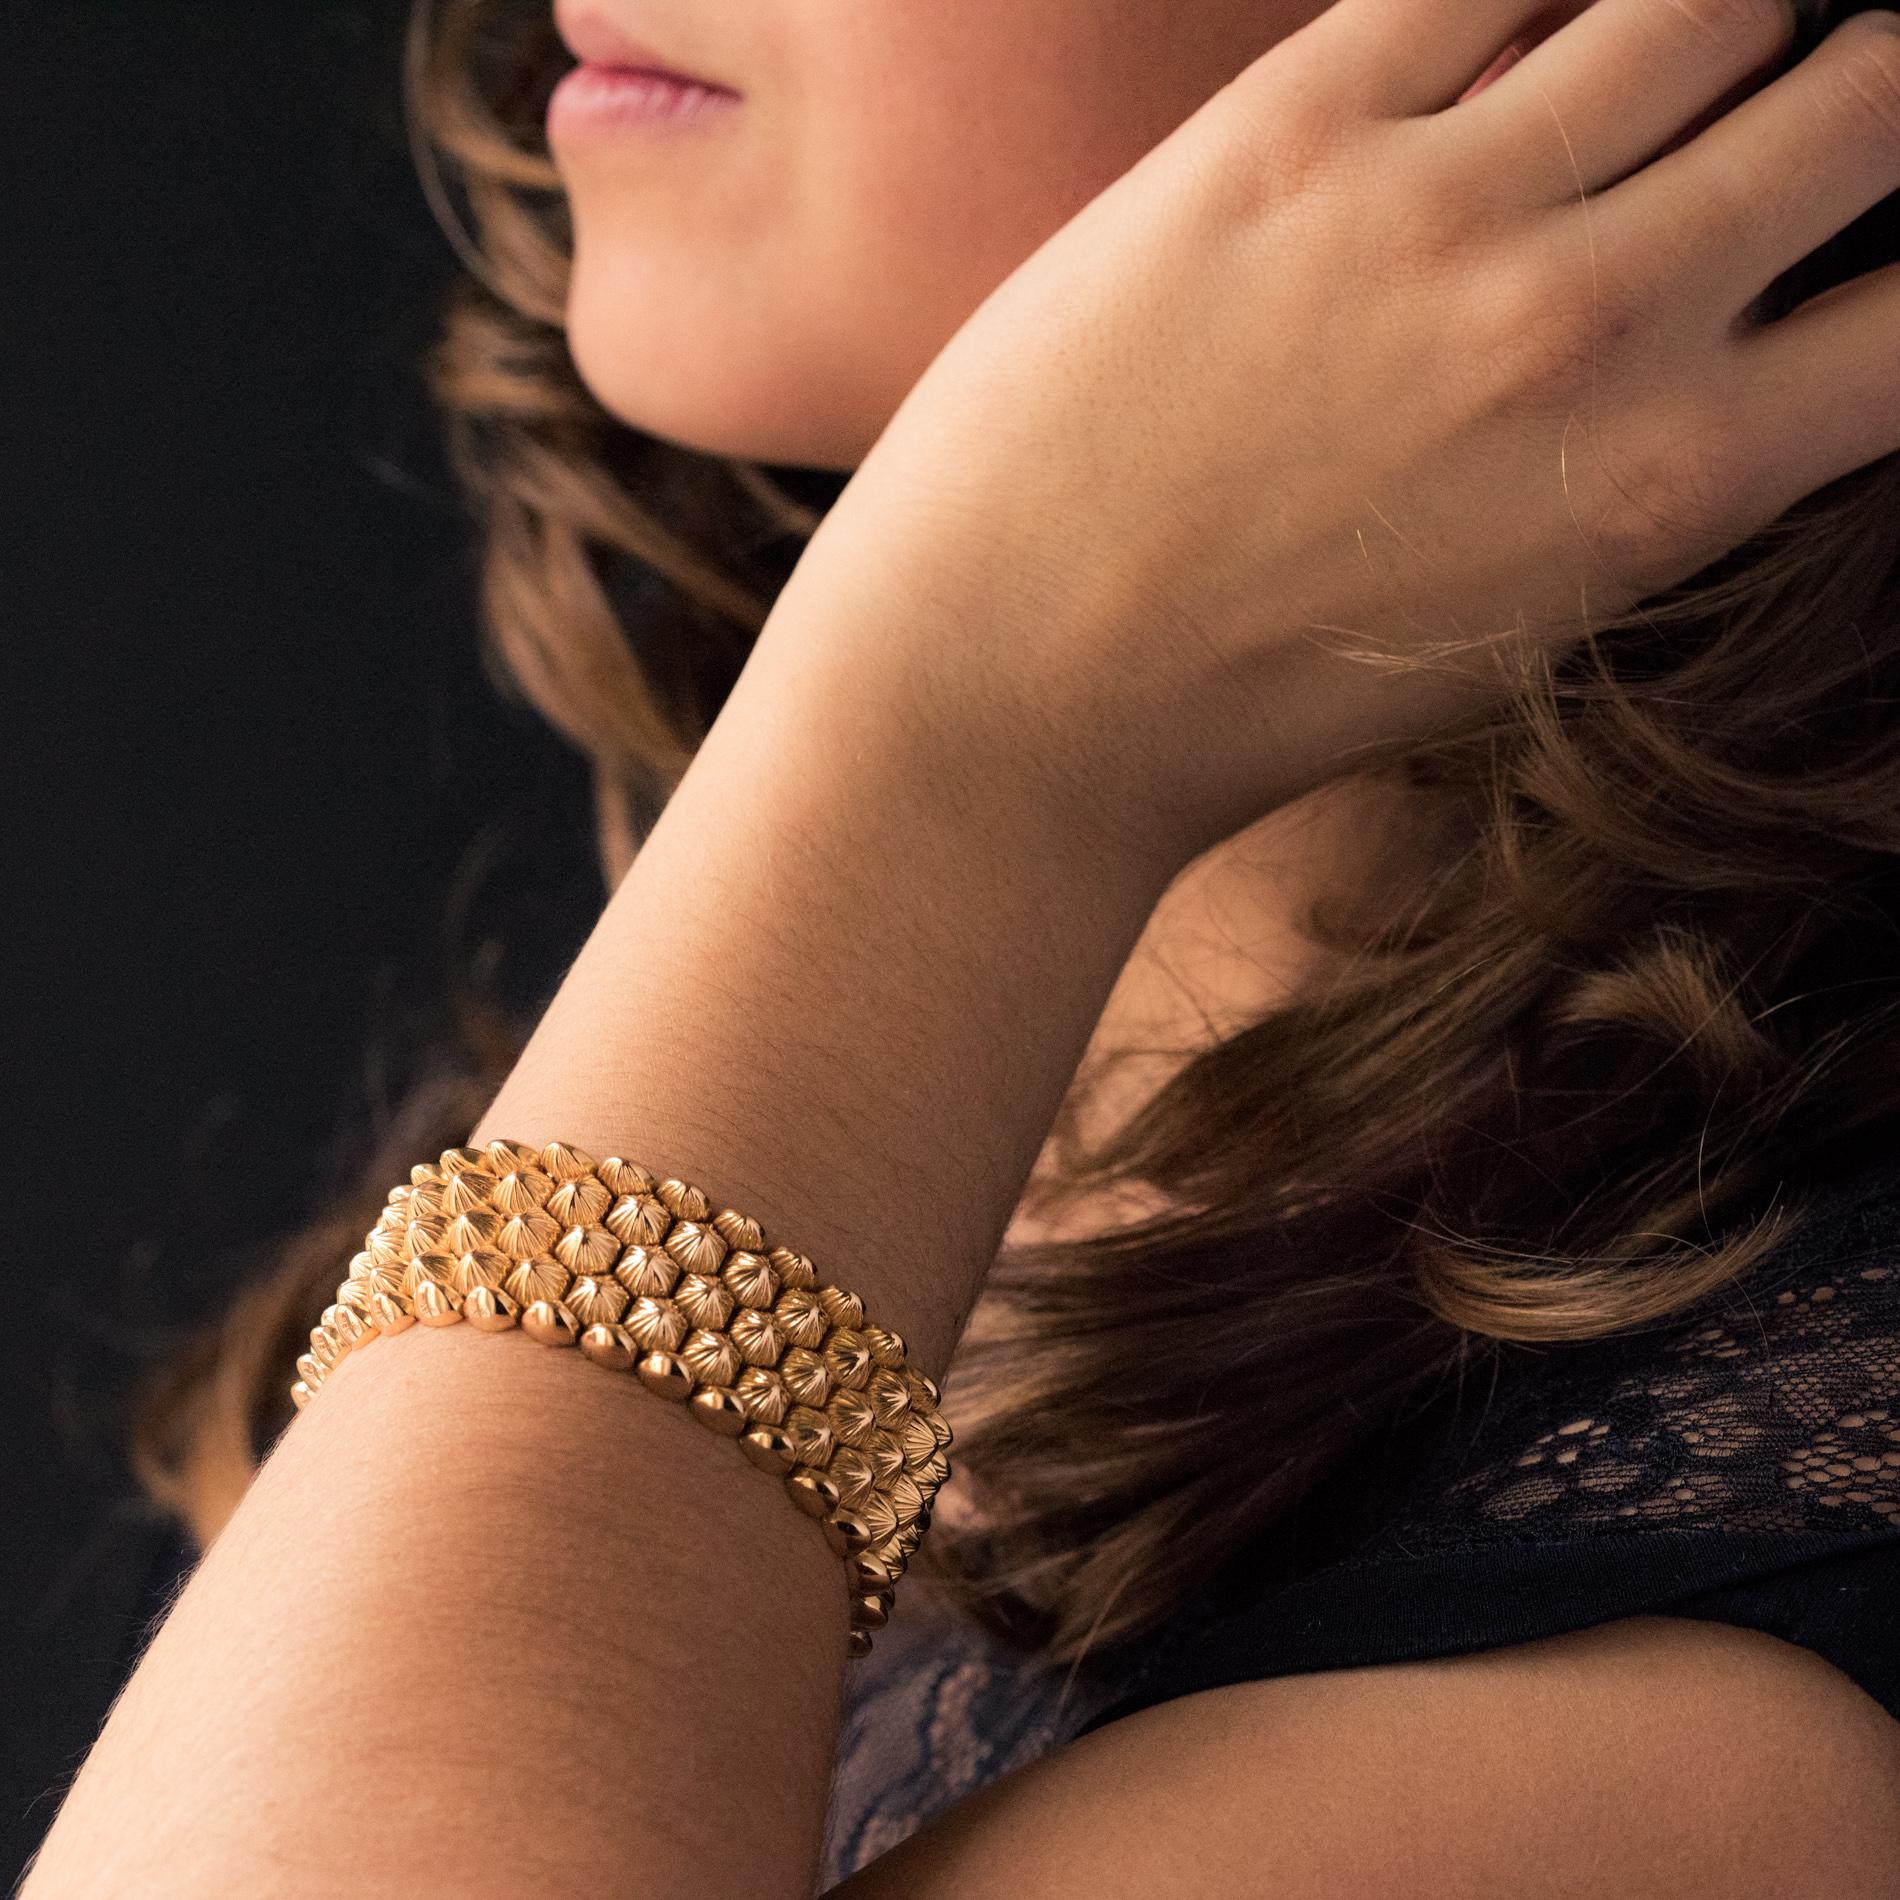 Bracelet in 18 karat yellow gold, eagle's head and rhinoceros hallmark.
Flexible, this retro gold bracelet is made of chiselled honeycomb patterns. The fastening system is ratchet with two safety 8.
Length: 19 cm, width: 2.5 cm, thickness: 4.9